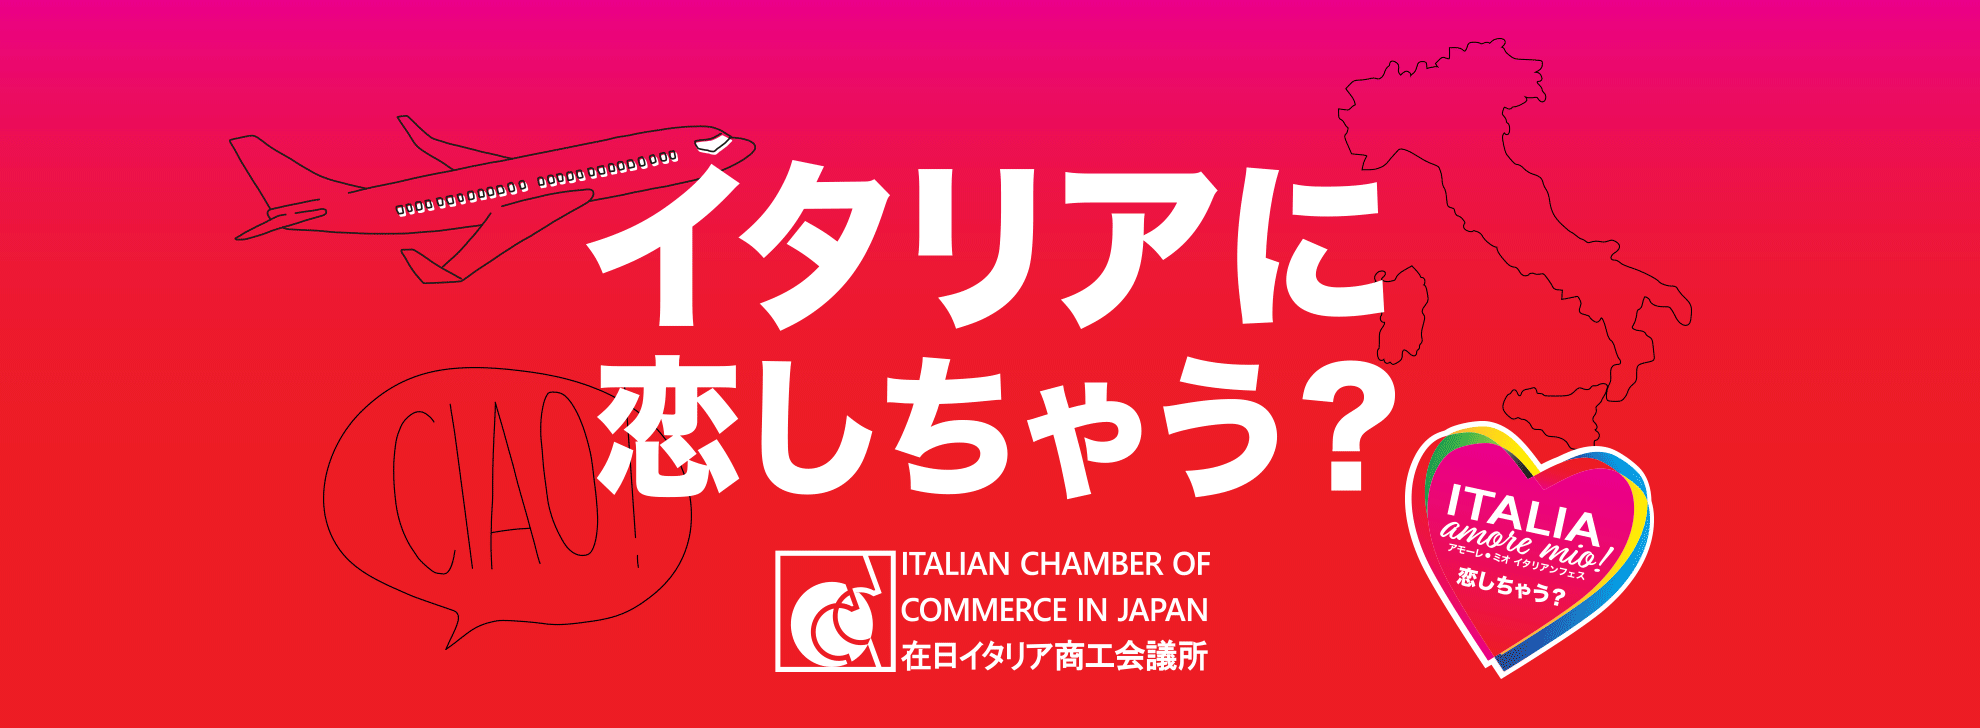 The Italian Chamber of Commerce in Japan (ICCJ)